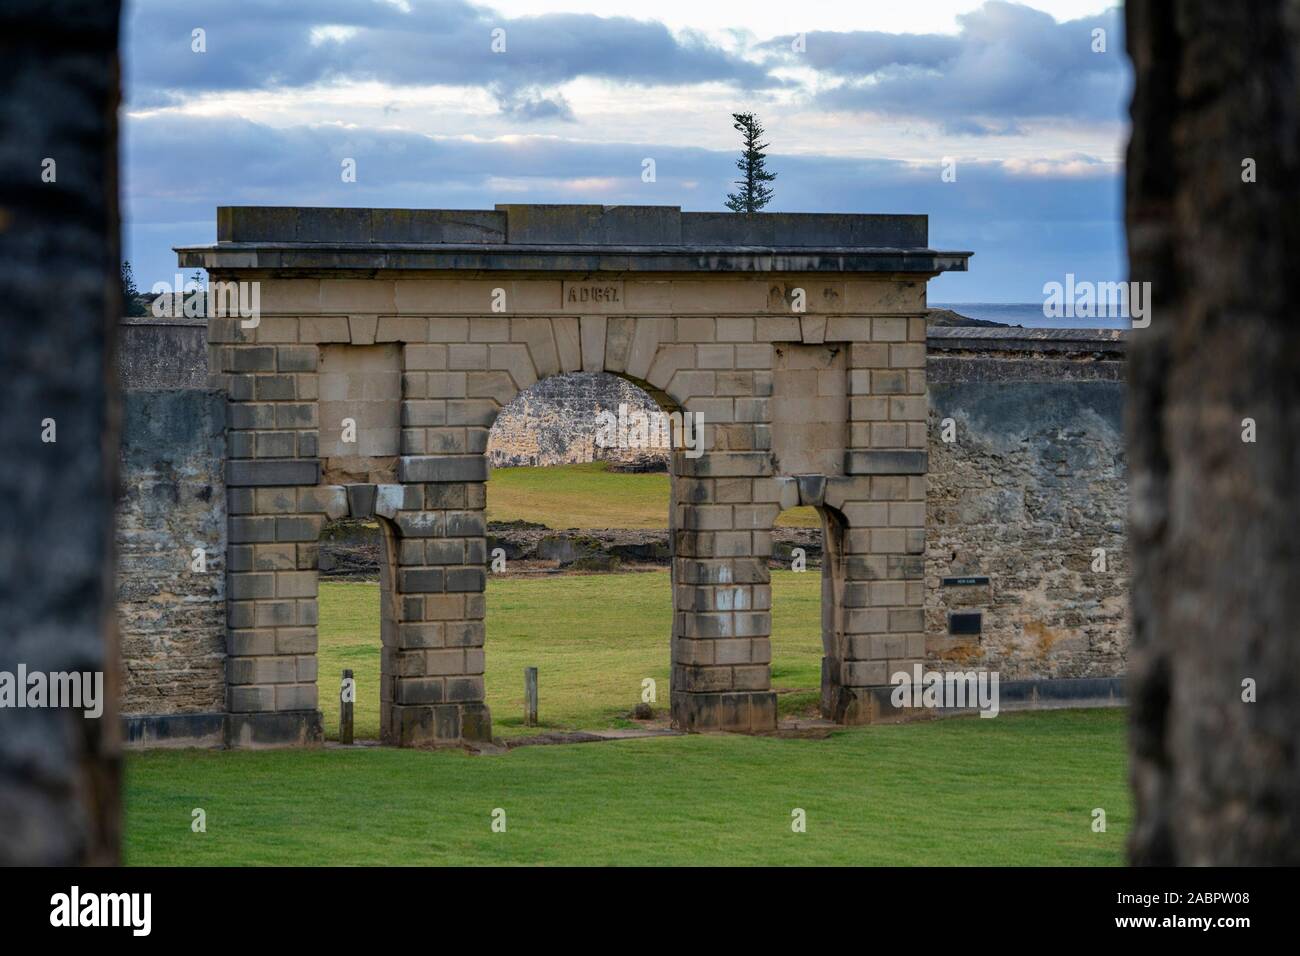 Gateway of the New Gaol built 1836-1847 in the most cruel times of convict settlement. Norfolk Island, Australia Stock Photo